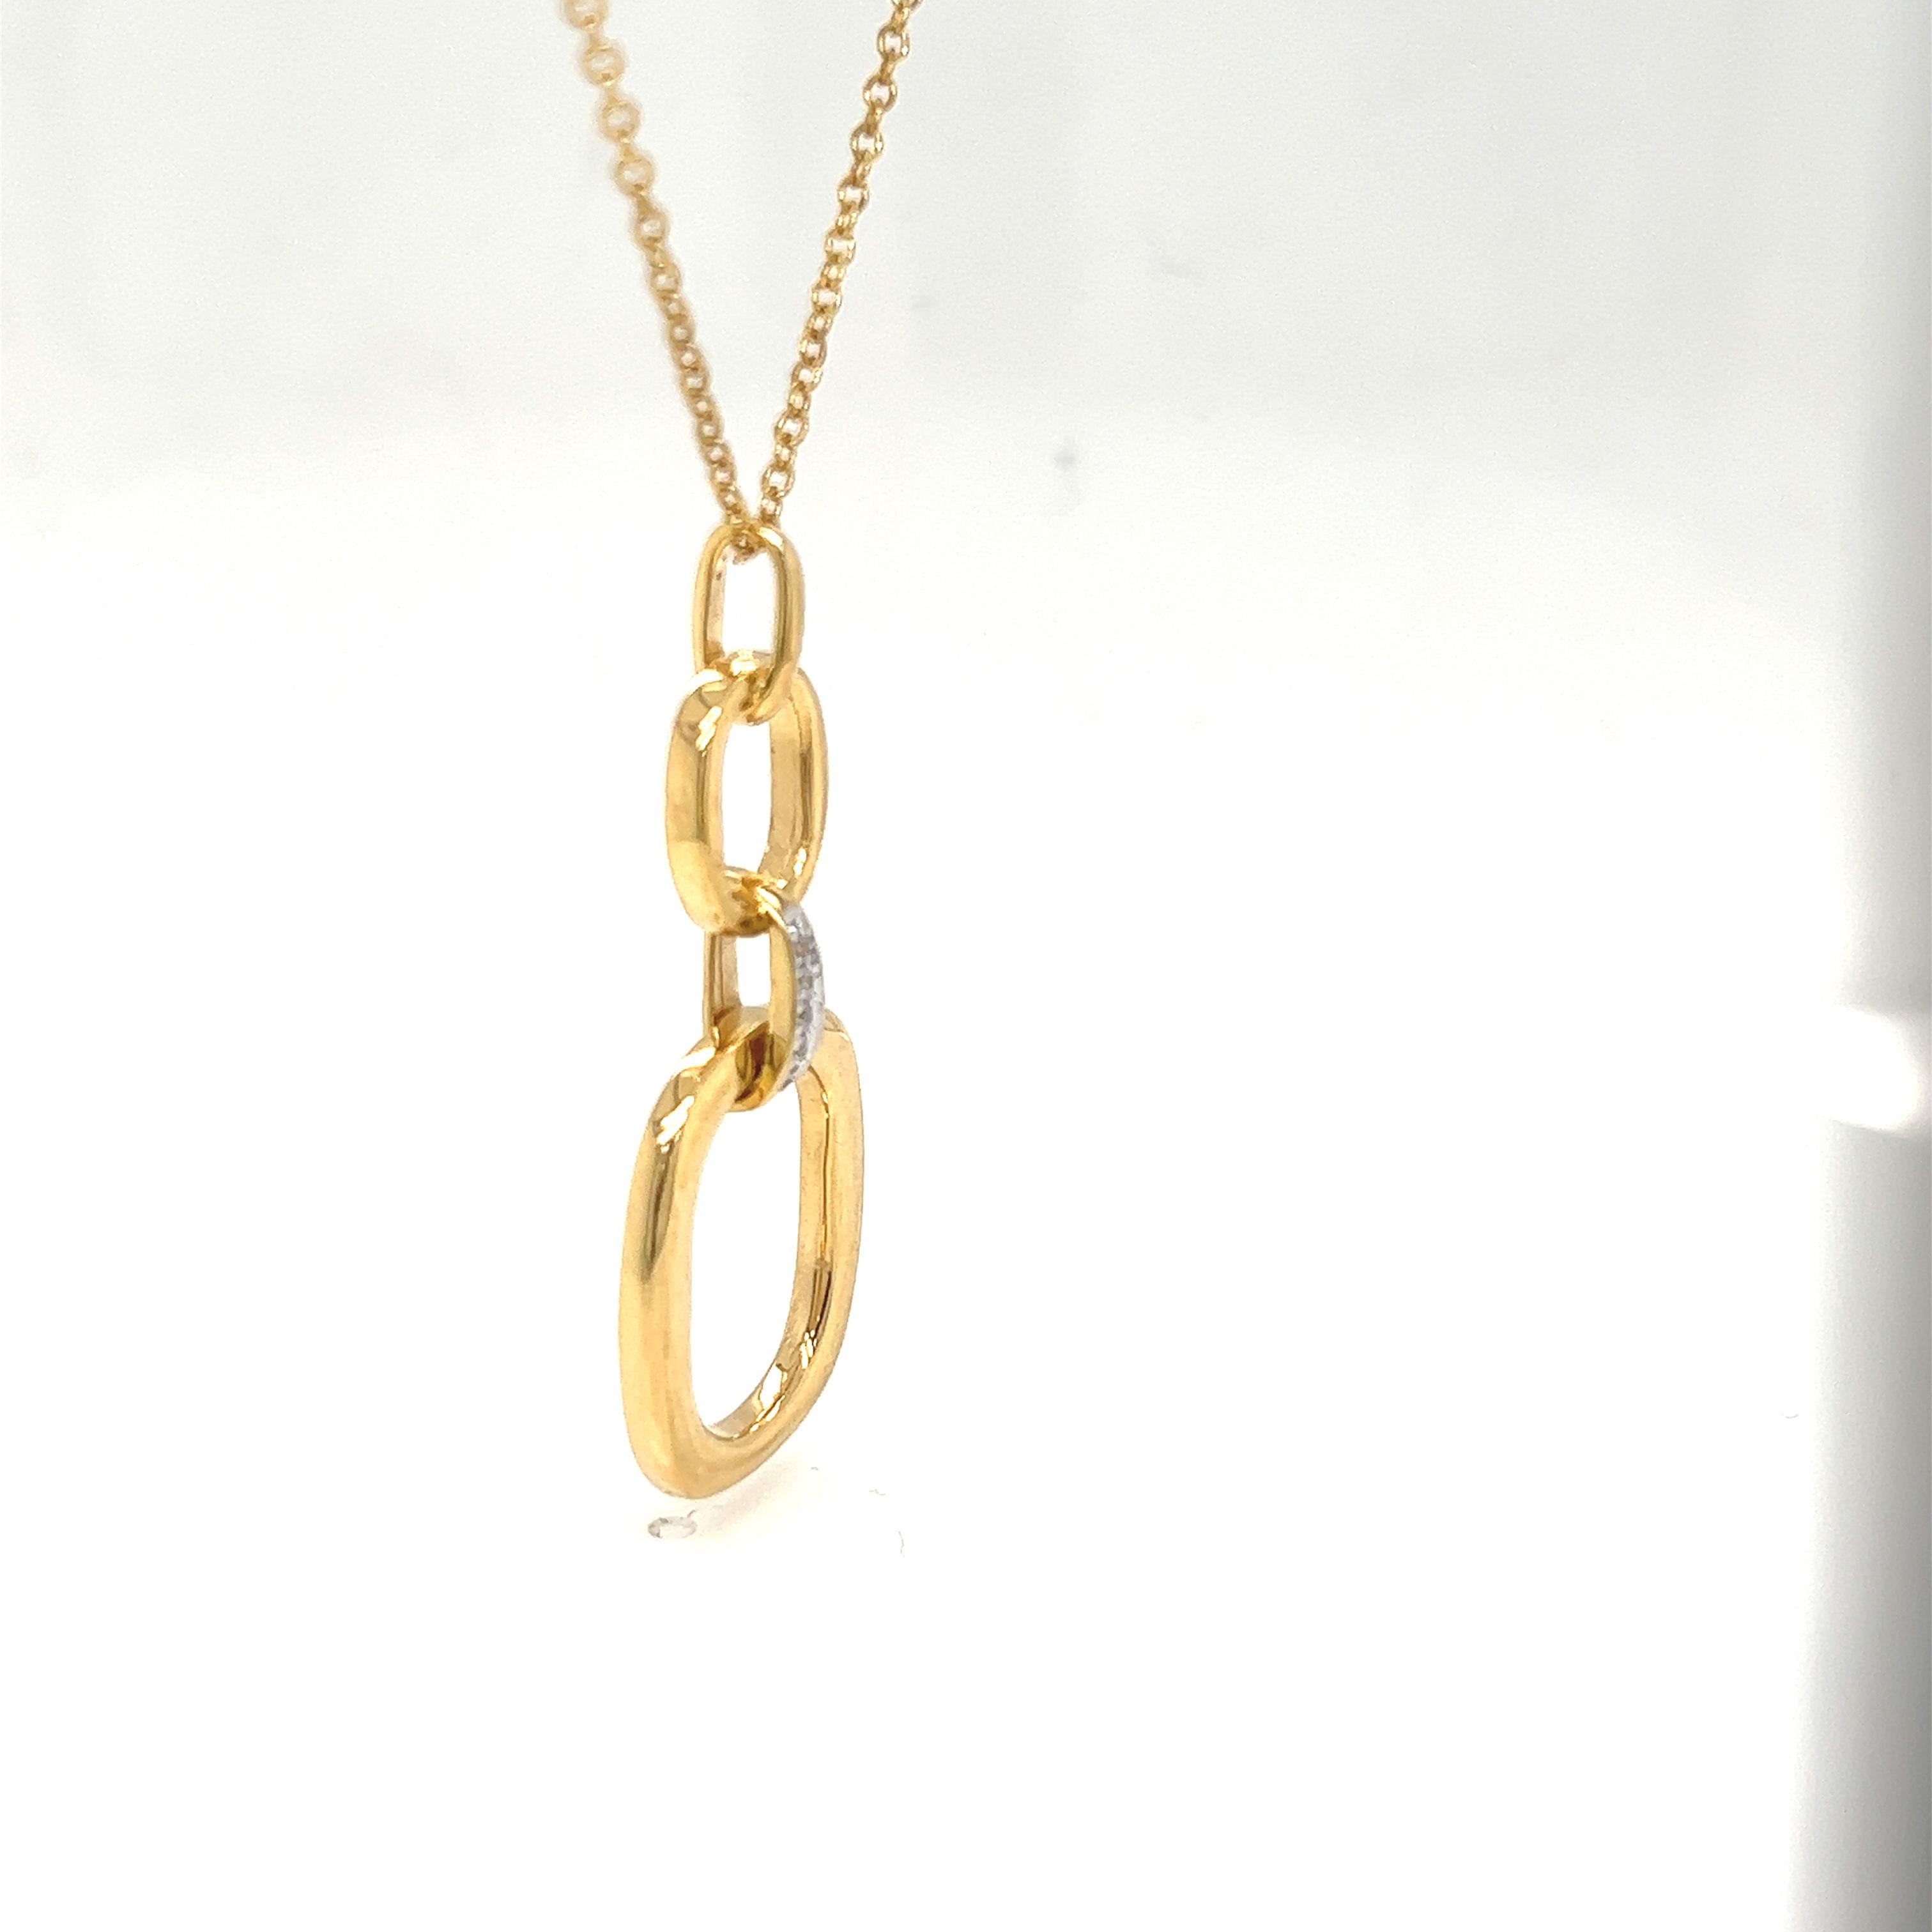 Hand-Crafted 14K Yellow Gold High Polish Graduating Open-Form Pendant In New Condition For Sale In Great Neck, NY